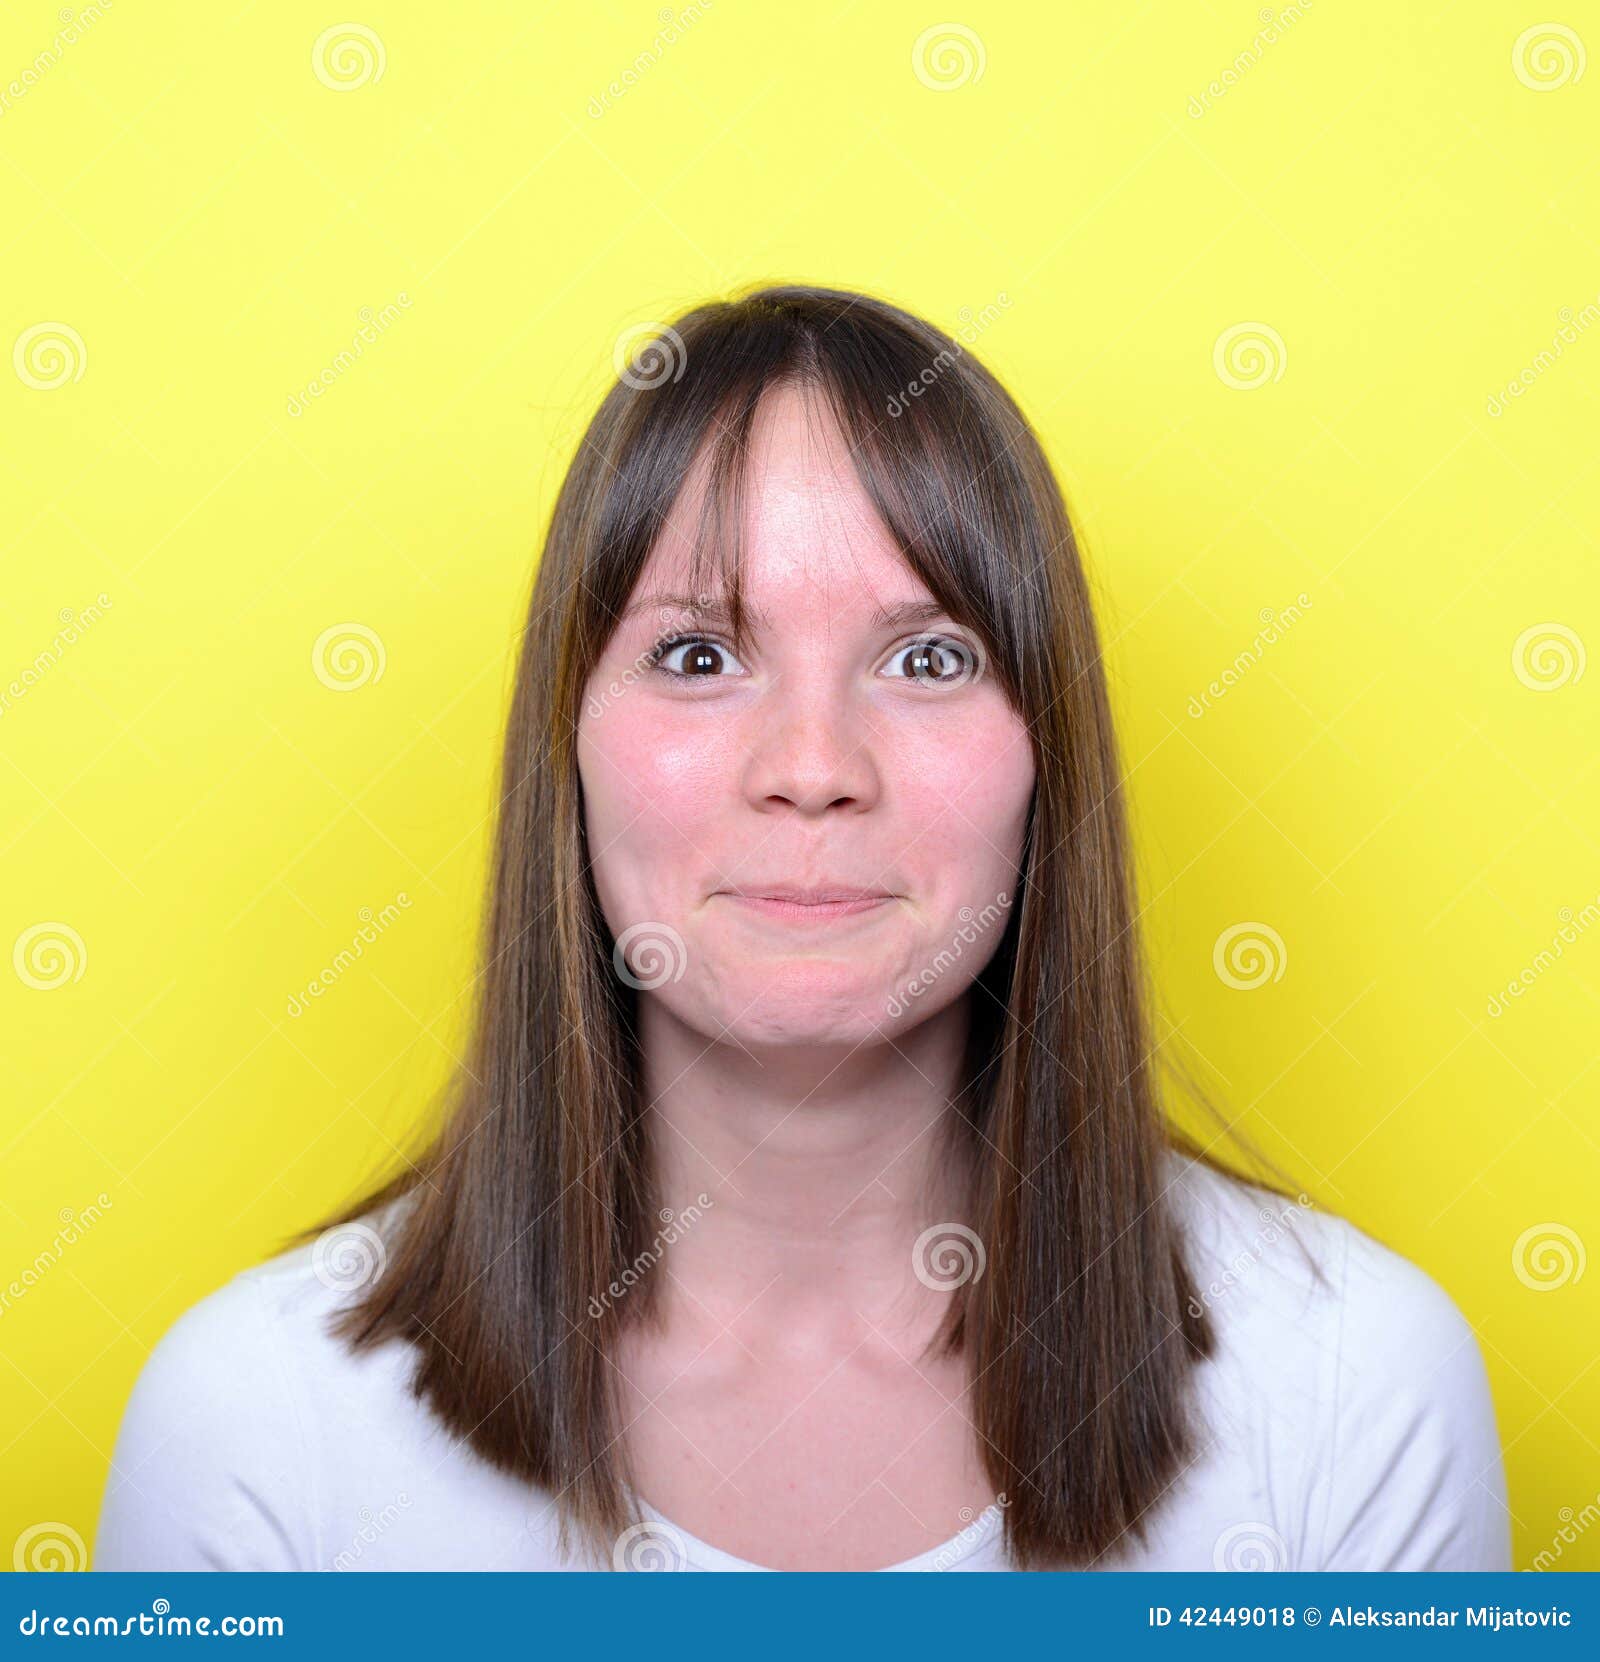 https://thumbs.dreamstime.com/z/portrait-girl-blushing-image-made-studio-model-standing-against-colored-backgrounds-set-various-conceptual-high-42449018.jpg